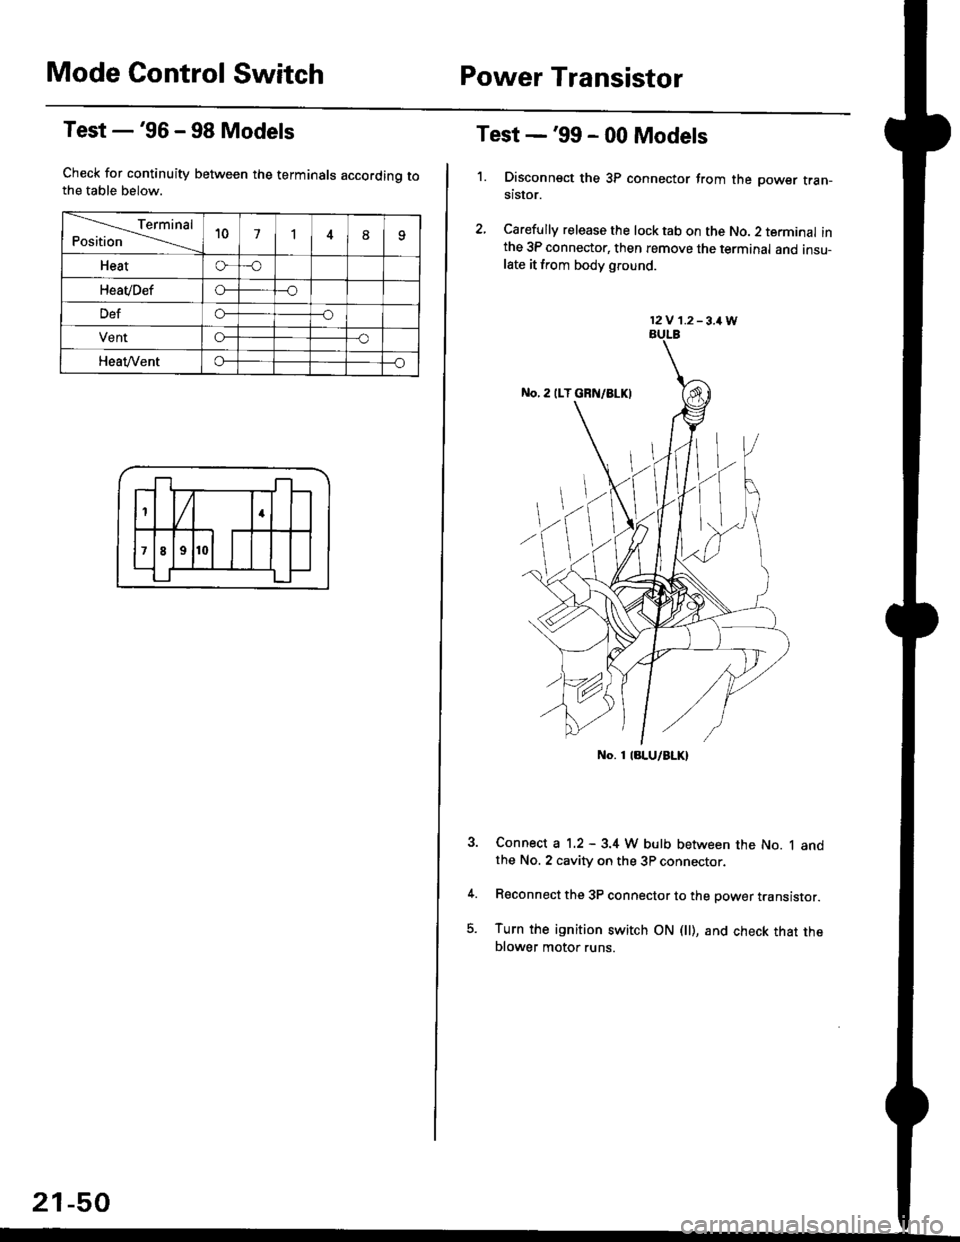 HONDA CIVIC 1998 6.G Workshop Manual Mode Control SwitchPower Transistor
Test -96 - 98 Models
Check for continuity between the terminals accordinq tothe table below.
Terminal
Positiont071
Heato-o
HeaVDefo---o
Defo--o
VentG-o
HeaVVento-